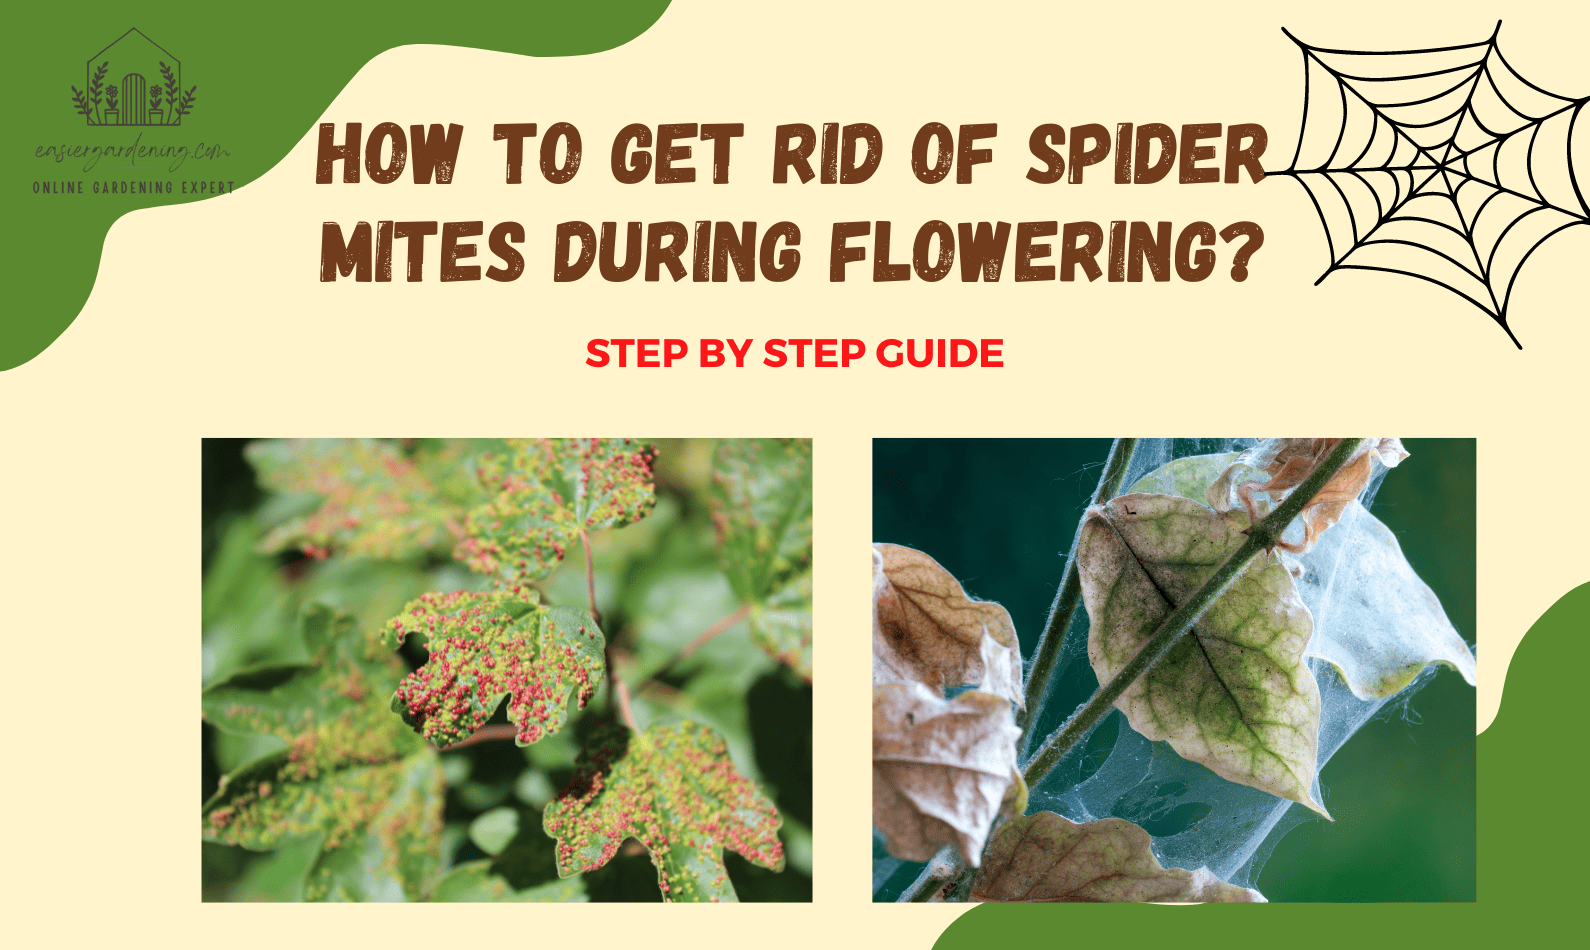 How to get Rid of Spider Mites During Flowering?